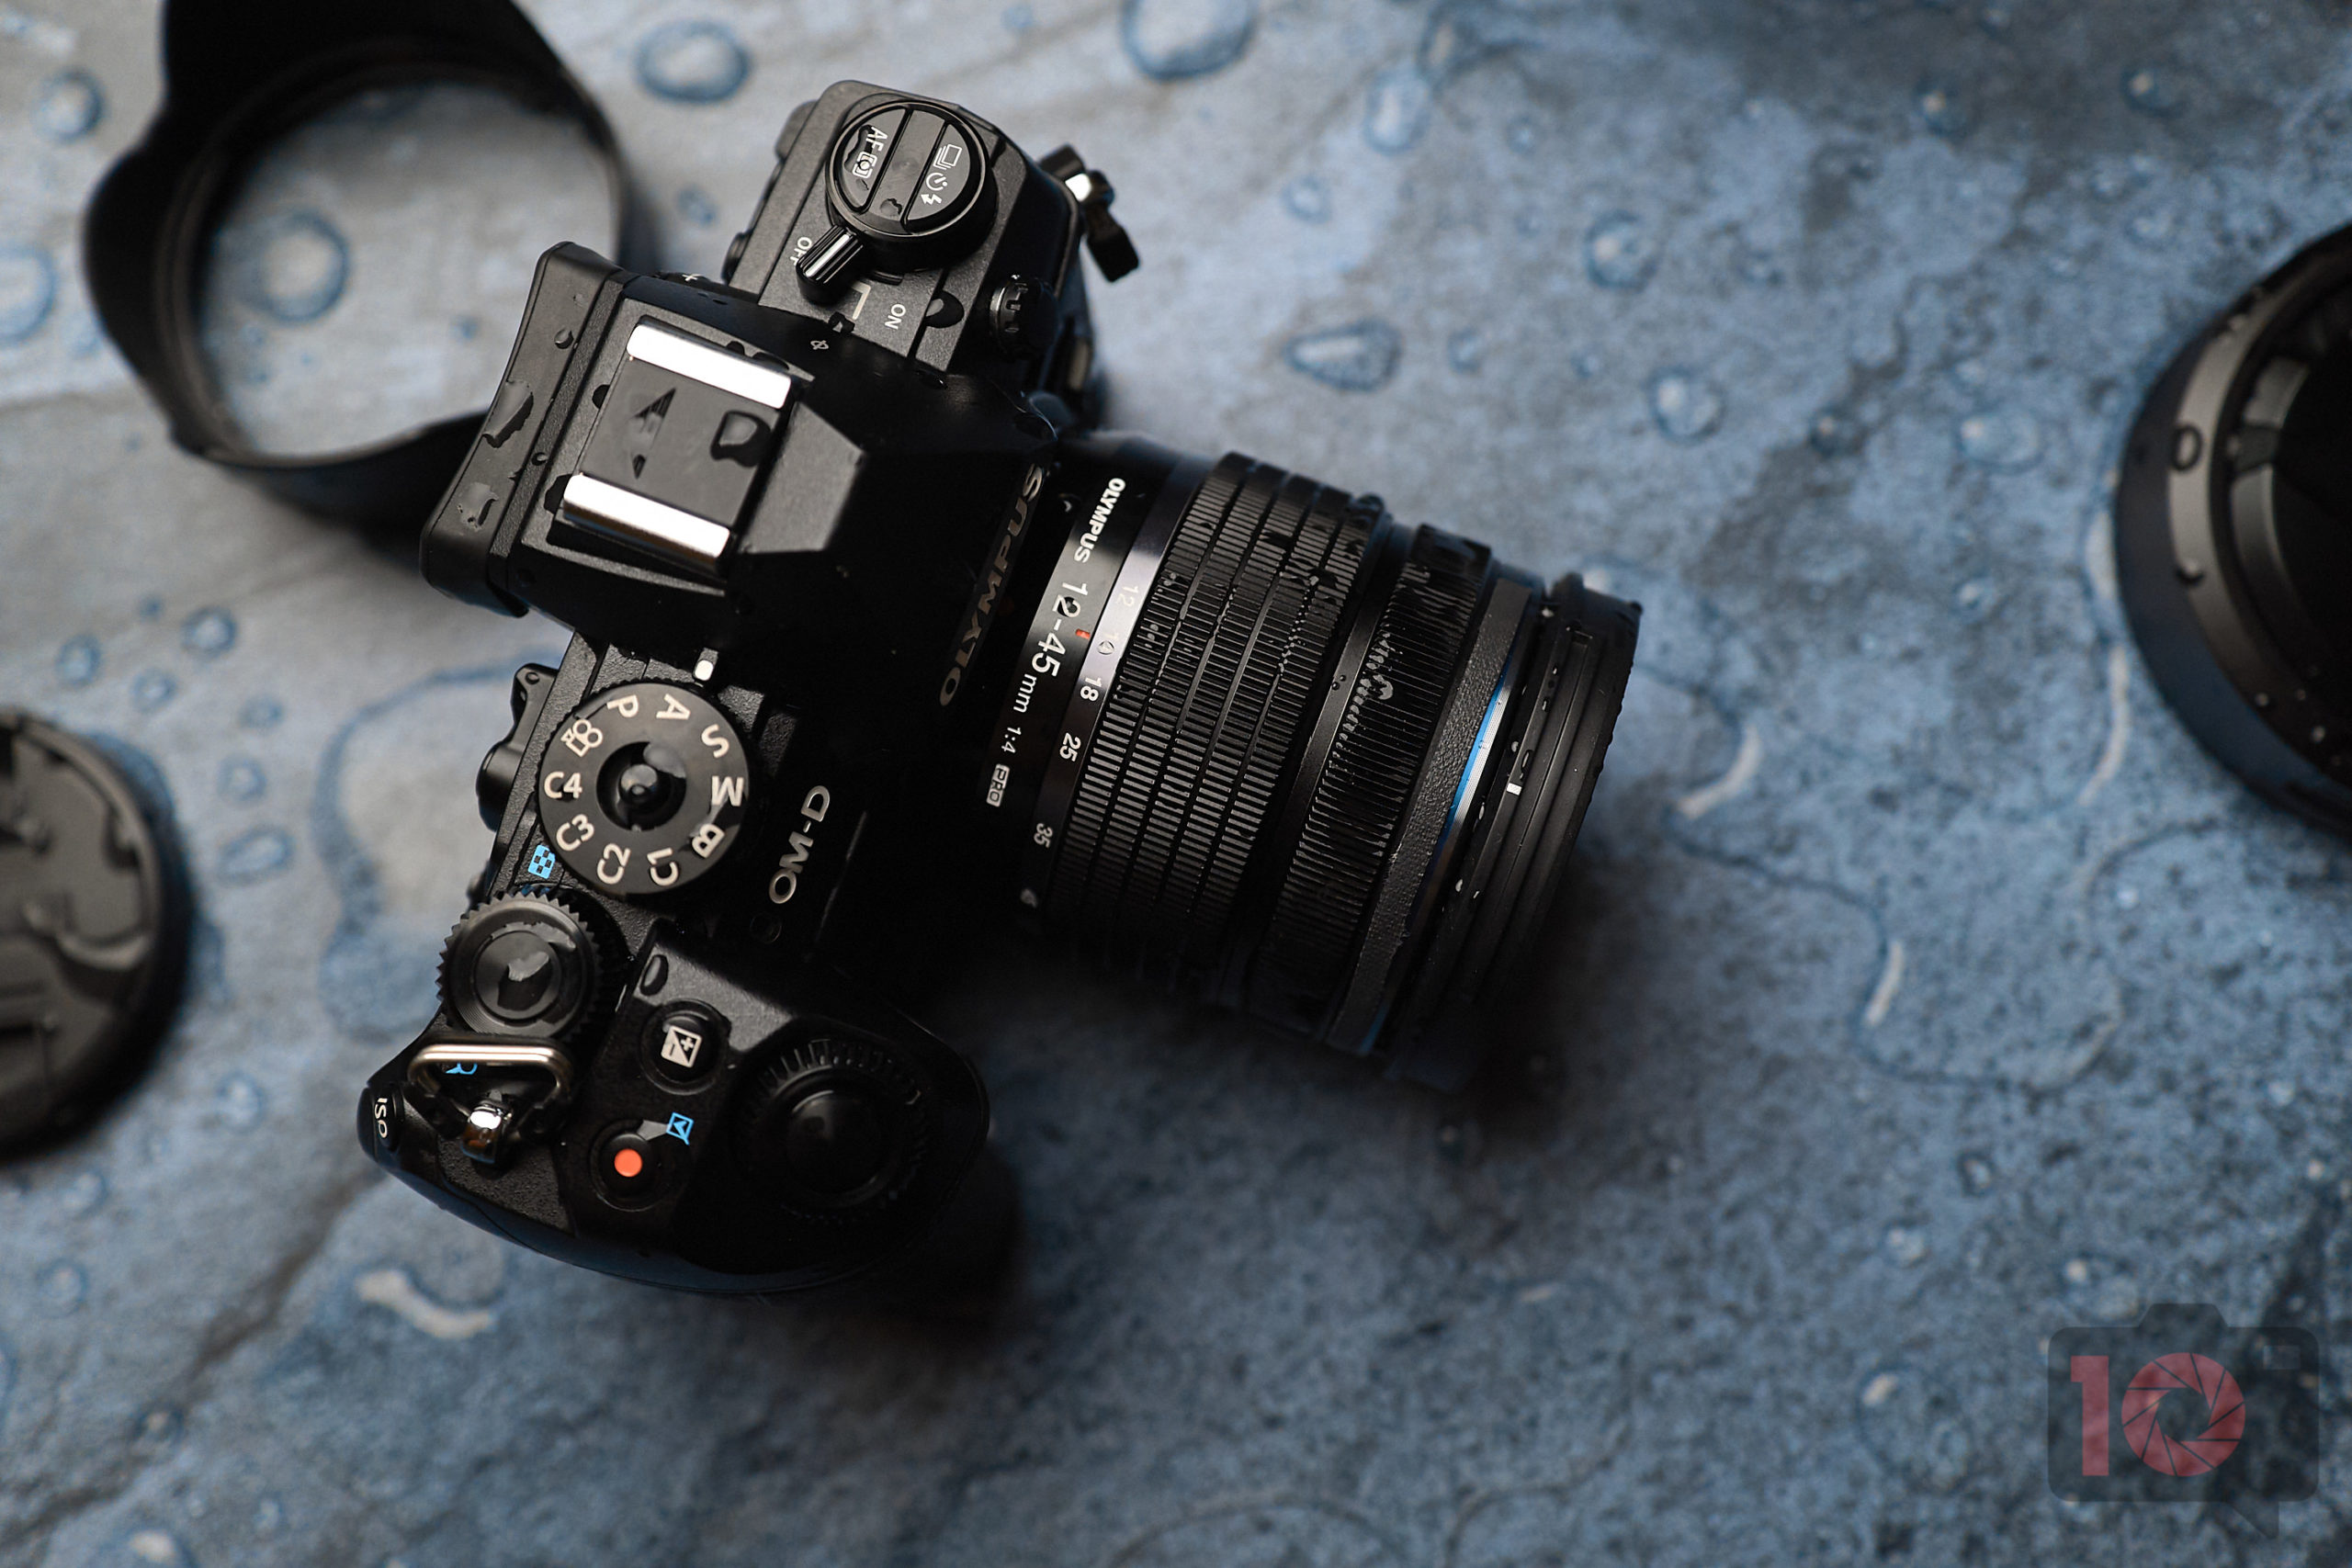 Review: Olympus mm f4 PRO F8 and Be There!